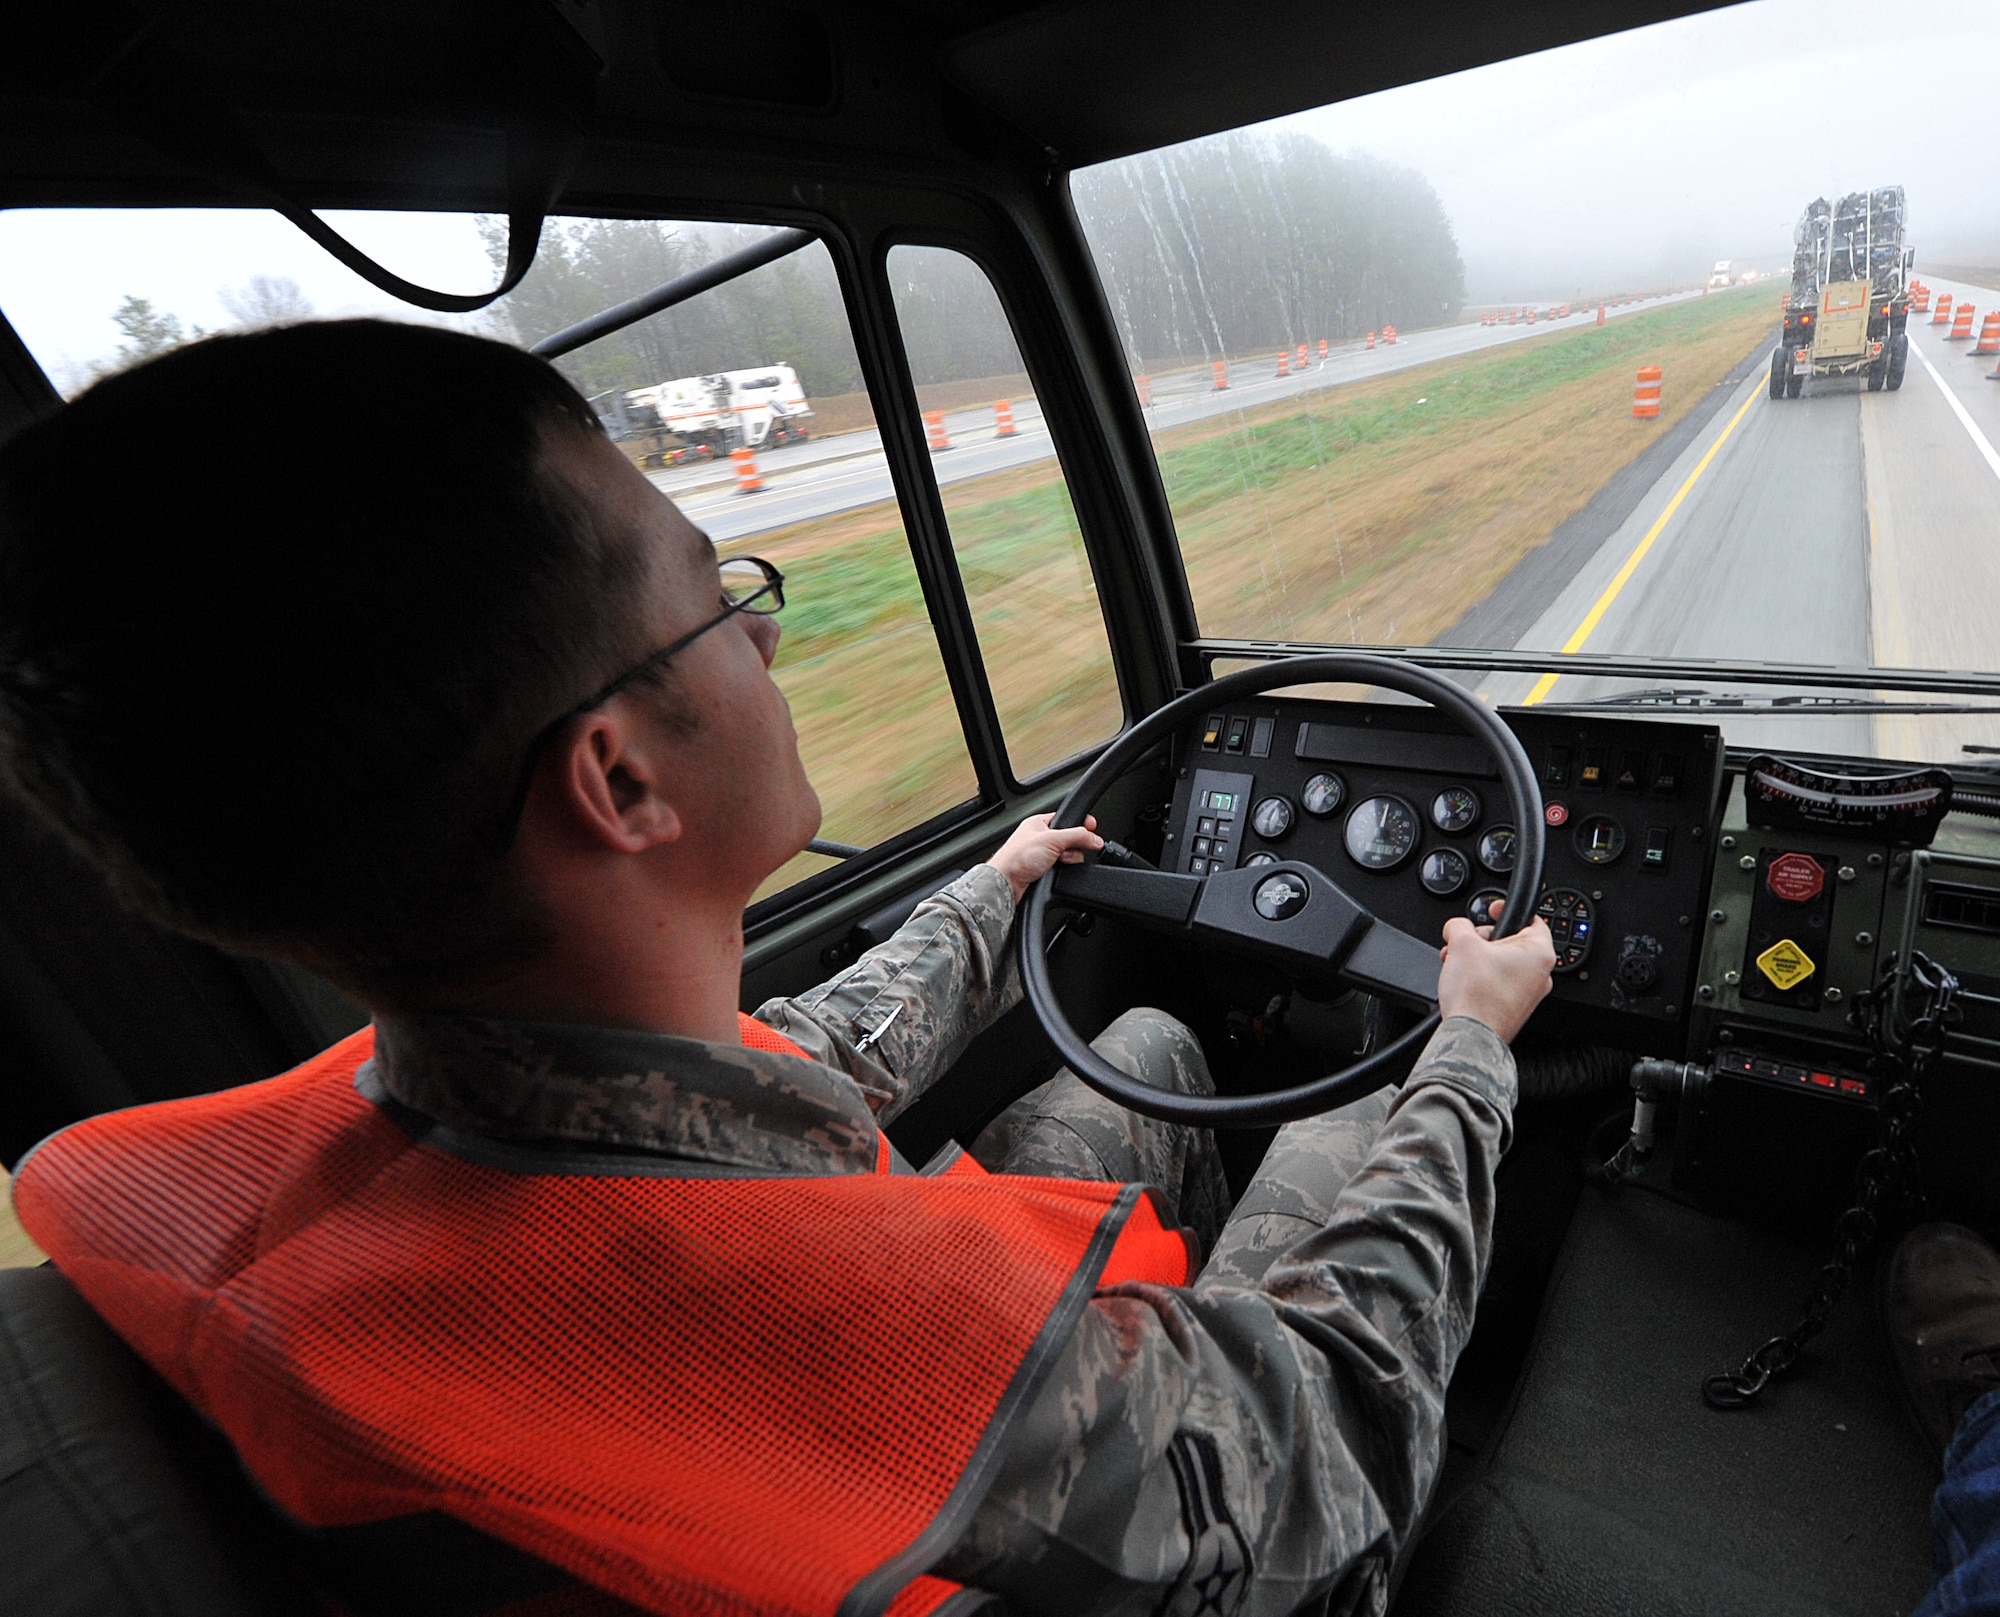 SAVANNAH AIR NATIONAL GUARD BASE, Ga. — Airman 1st Class Bryan Dover, 52nd Combat Communications Squadron cyber transmission systems journeyman, drives a light medium tactical vehicle as part of the second chalk convoy to Savannah, Ga., Jan. 23. The unit began its “Arctic Gator” field training exercise Jan. 24 and will build, operate in and defend a fully functioning bare base communications camp before the exercise ends Feb. 3. (U.S. Air Force photo by Tommie Horton)